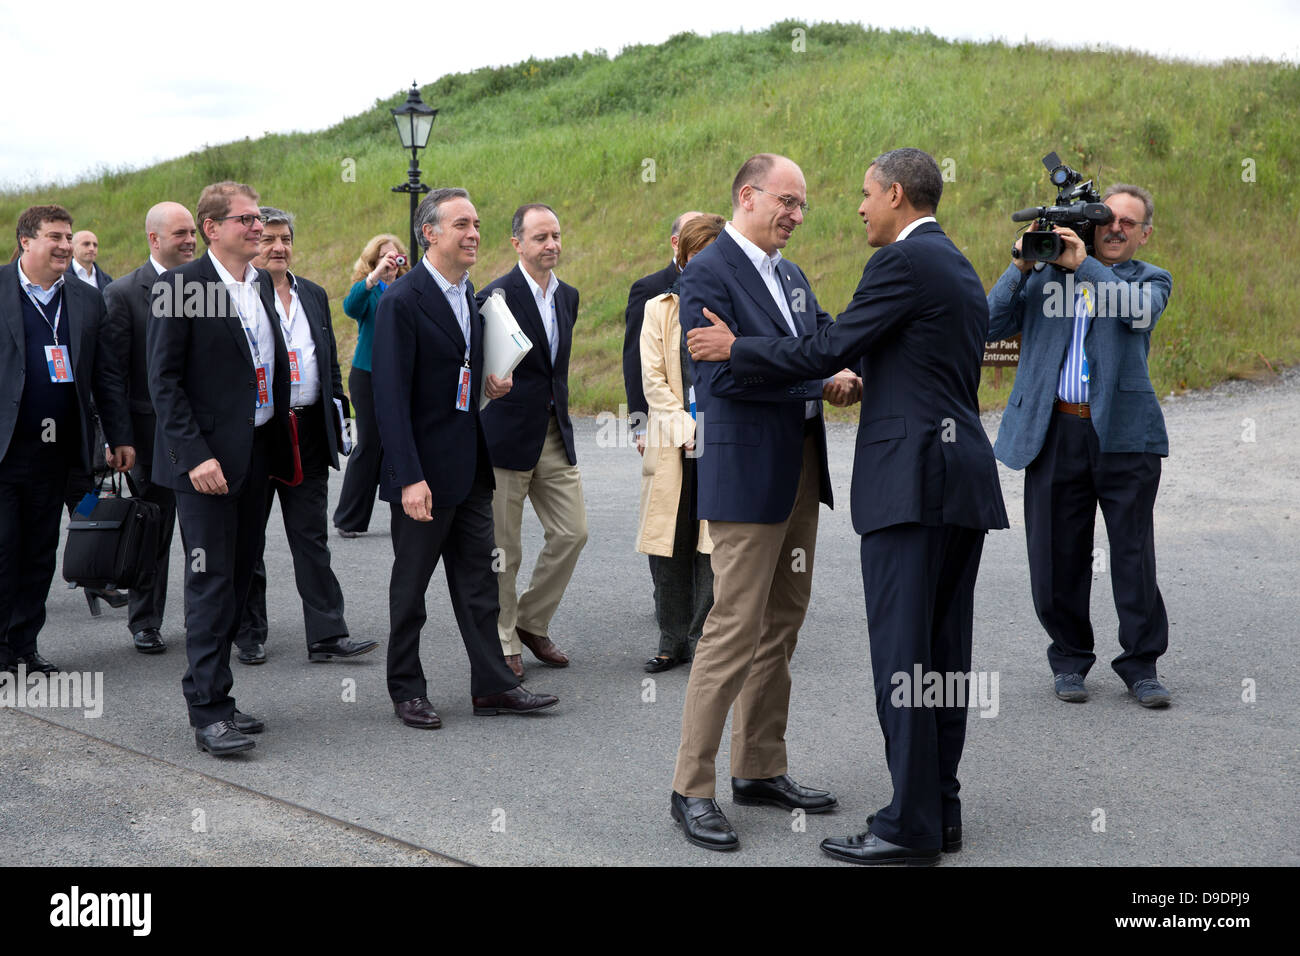 President Barack Obama greets Prime Minister Enrico Letta of Italy at the G8 Summit in Lough Erne, Northern Ireland, June 17, 20 Stock Photo